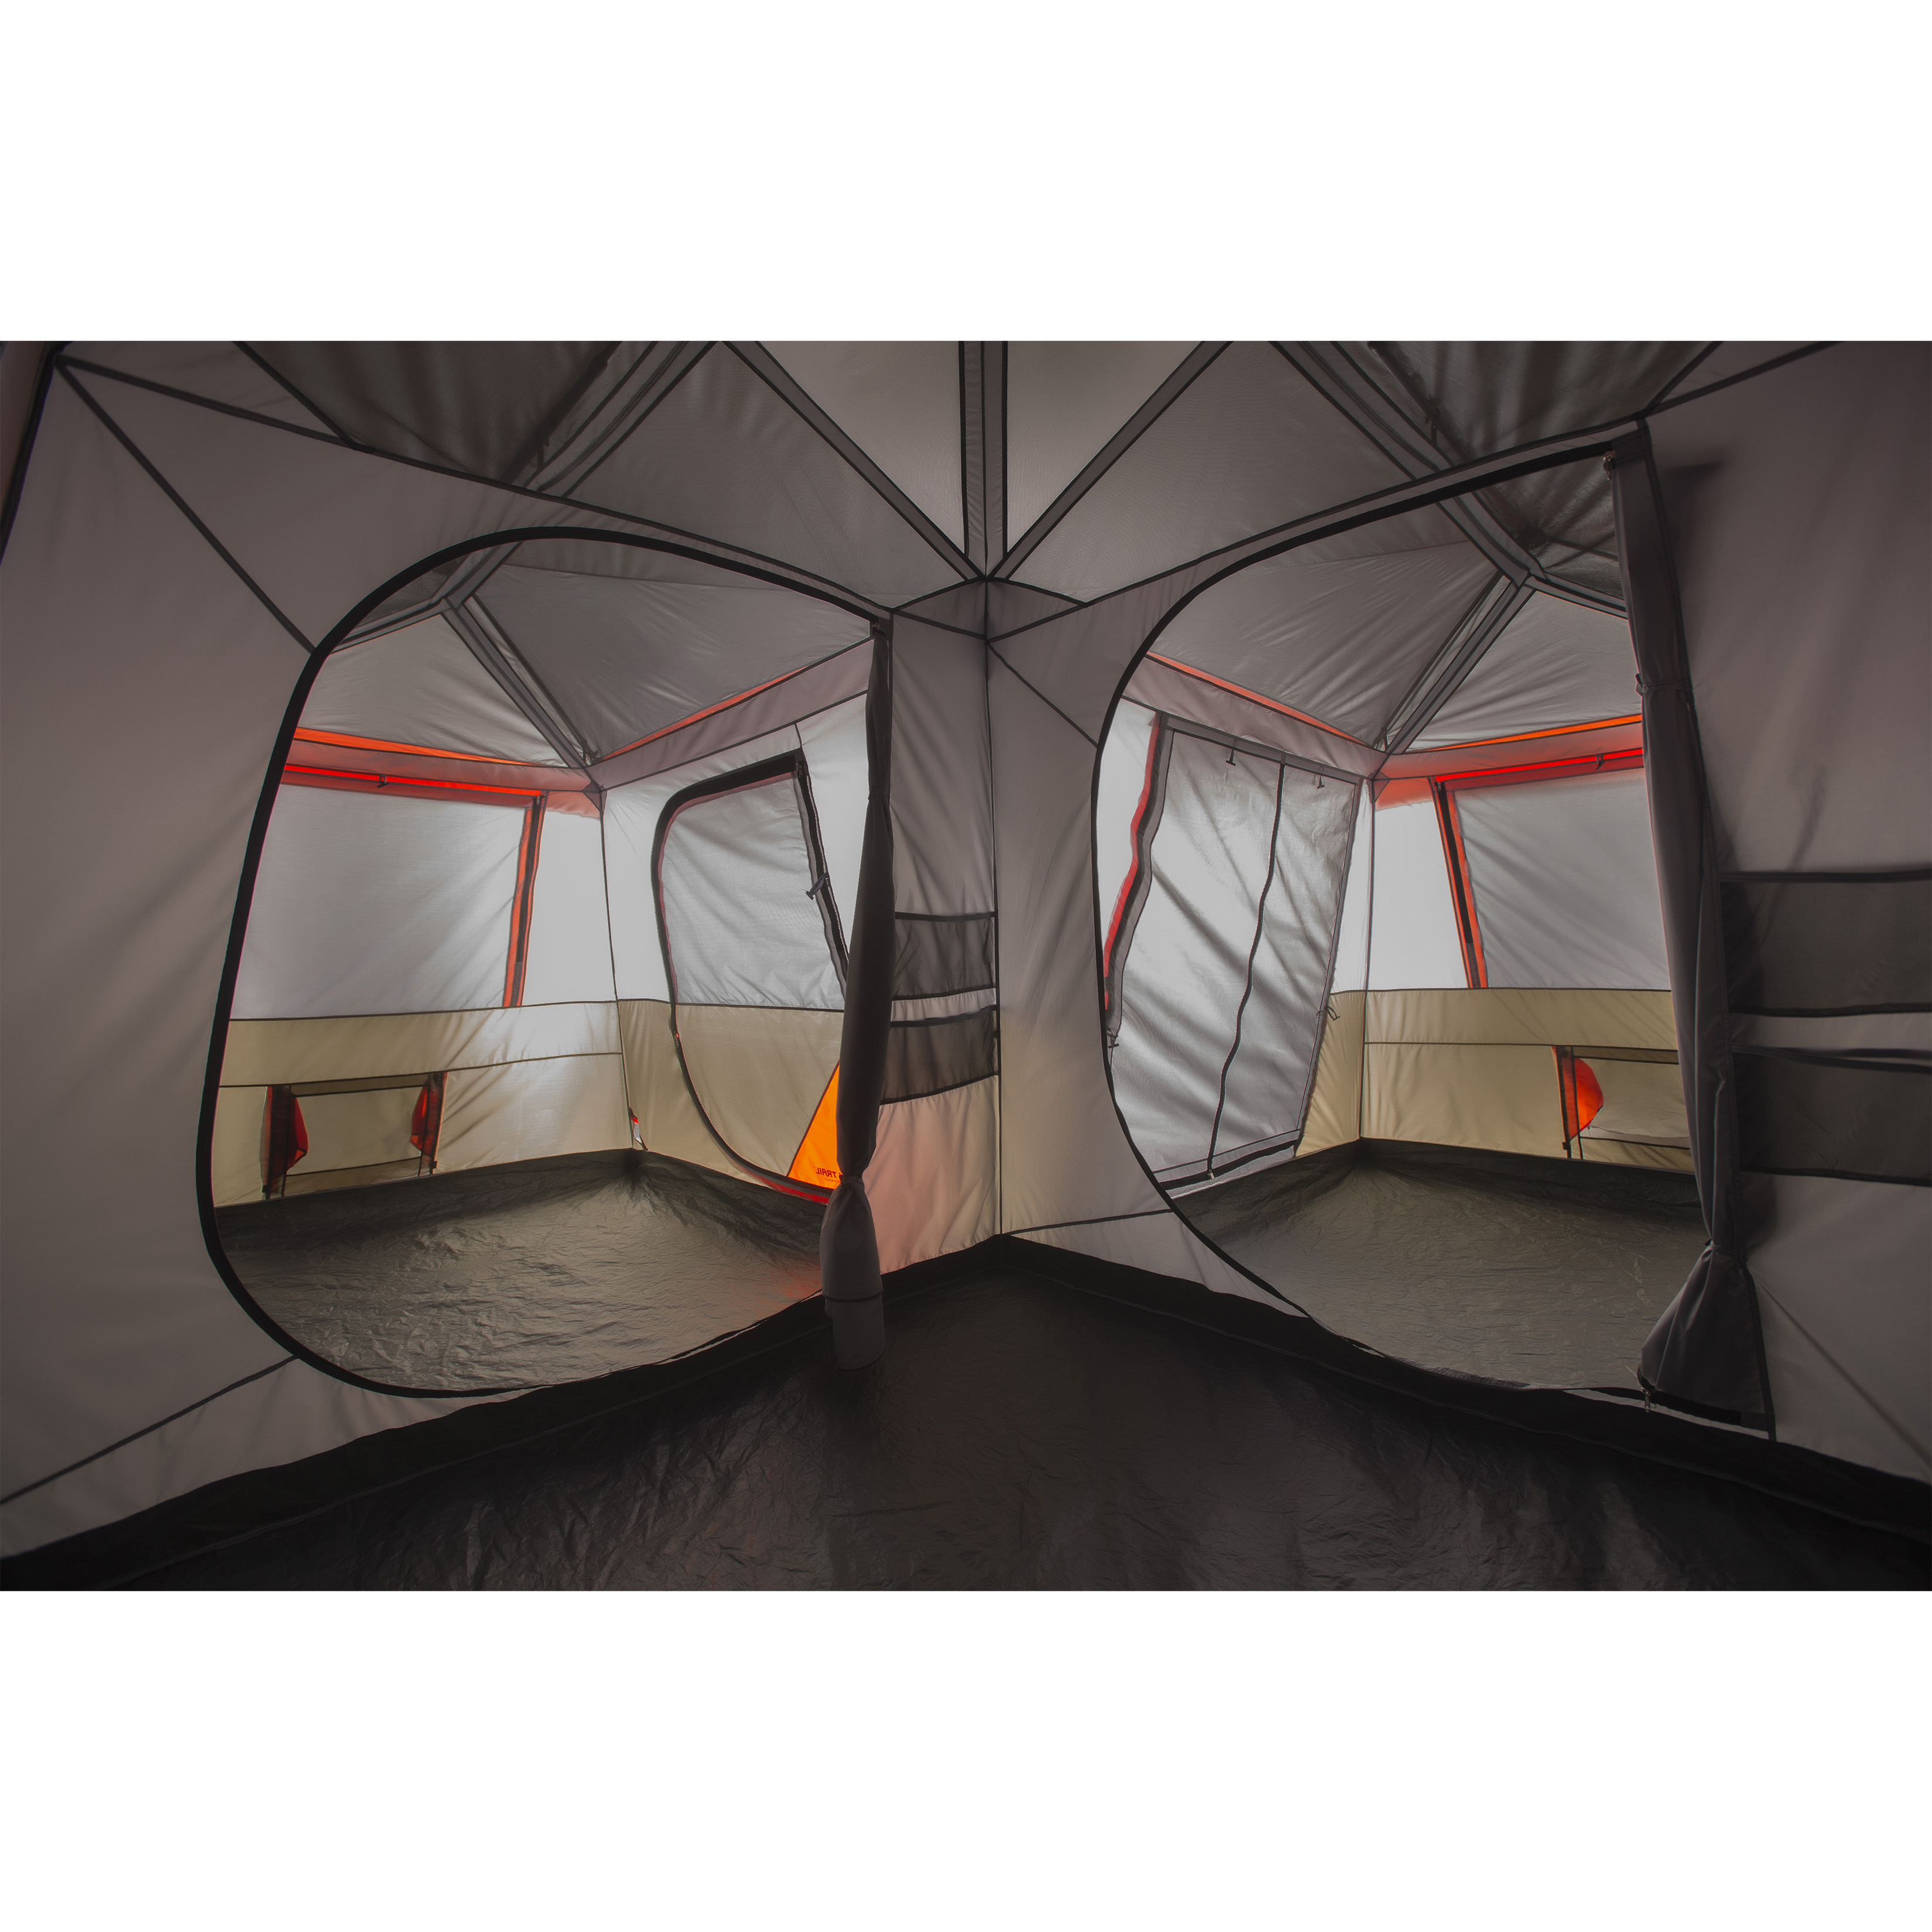 Ozark Trail 16' x 16' Instant Cabin Tent, Sleeps 12, 55.2 lbs - image 4 of 10